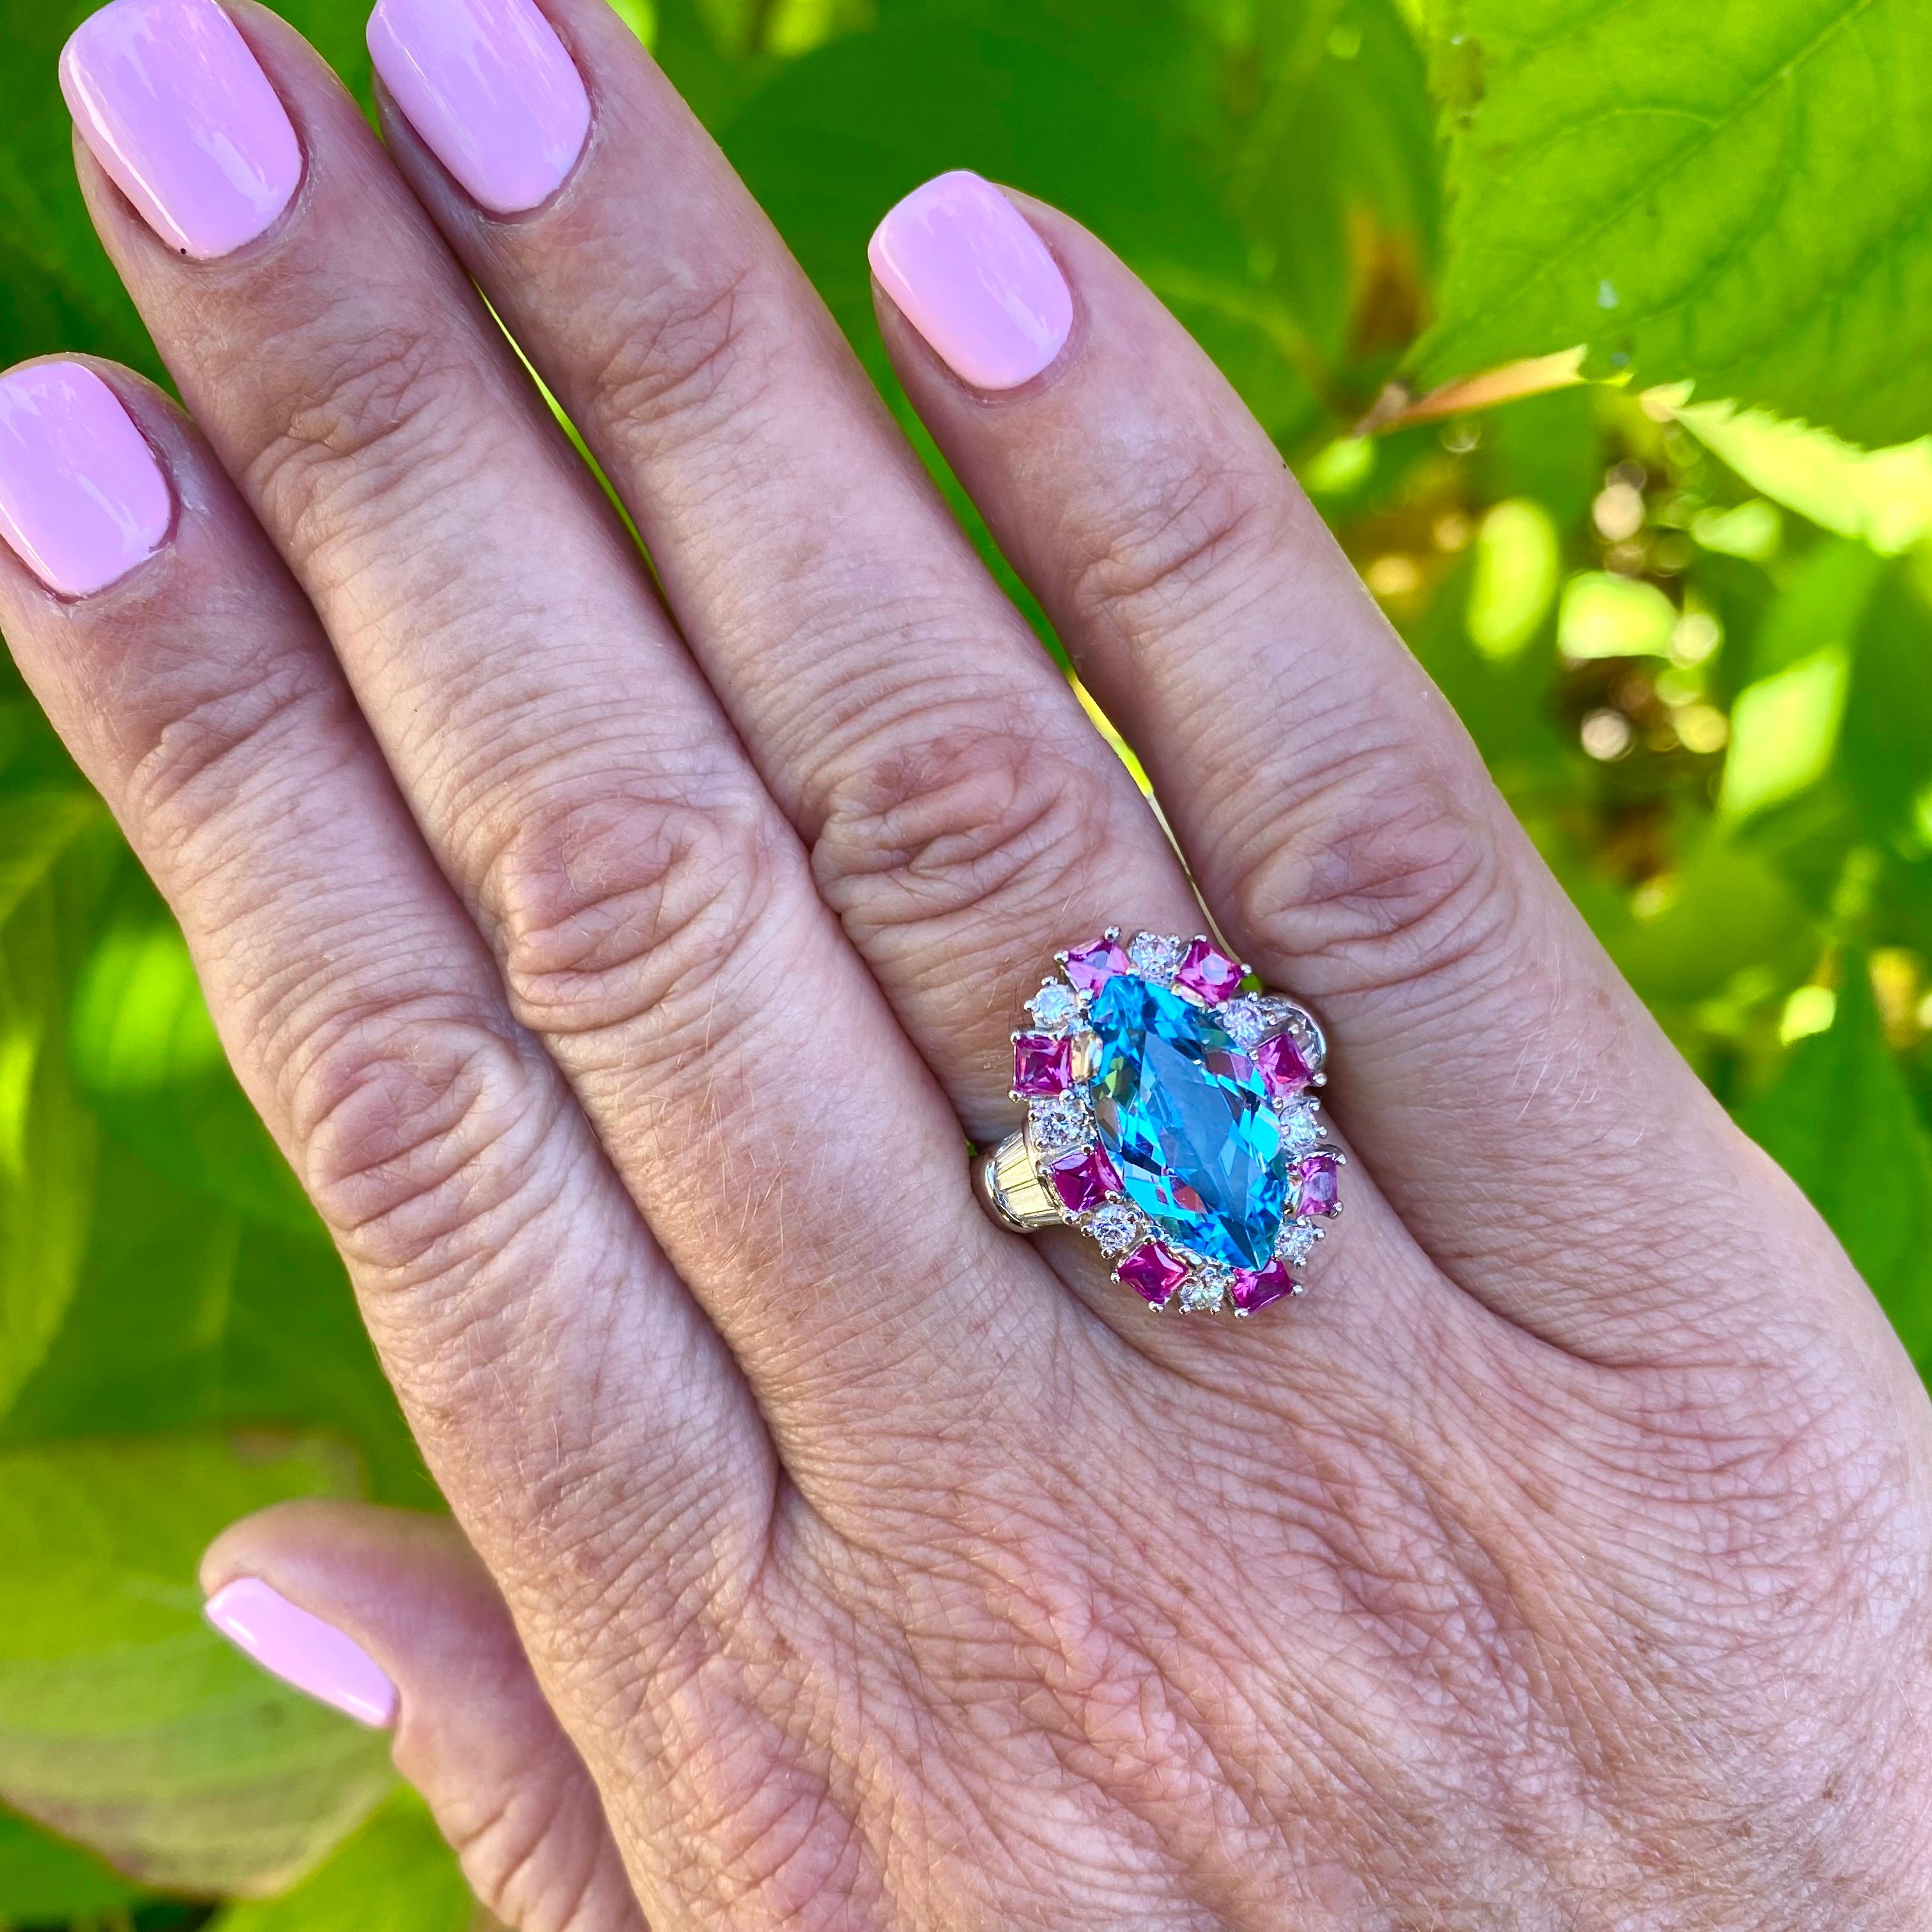 A statement ring with a perfect splash of color! Platinum ring features a 4.0 carat Marquise Brilliant Cut Aquamarine accented with 8 square cut Rubies totaling 1.44 carats, and 20 round brilliant & tapered baguette Diamonds totaling 0.88 carats.